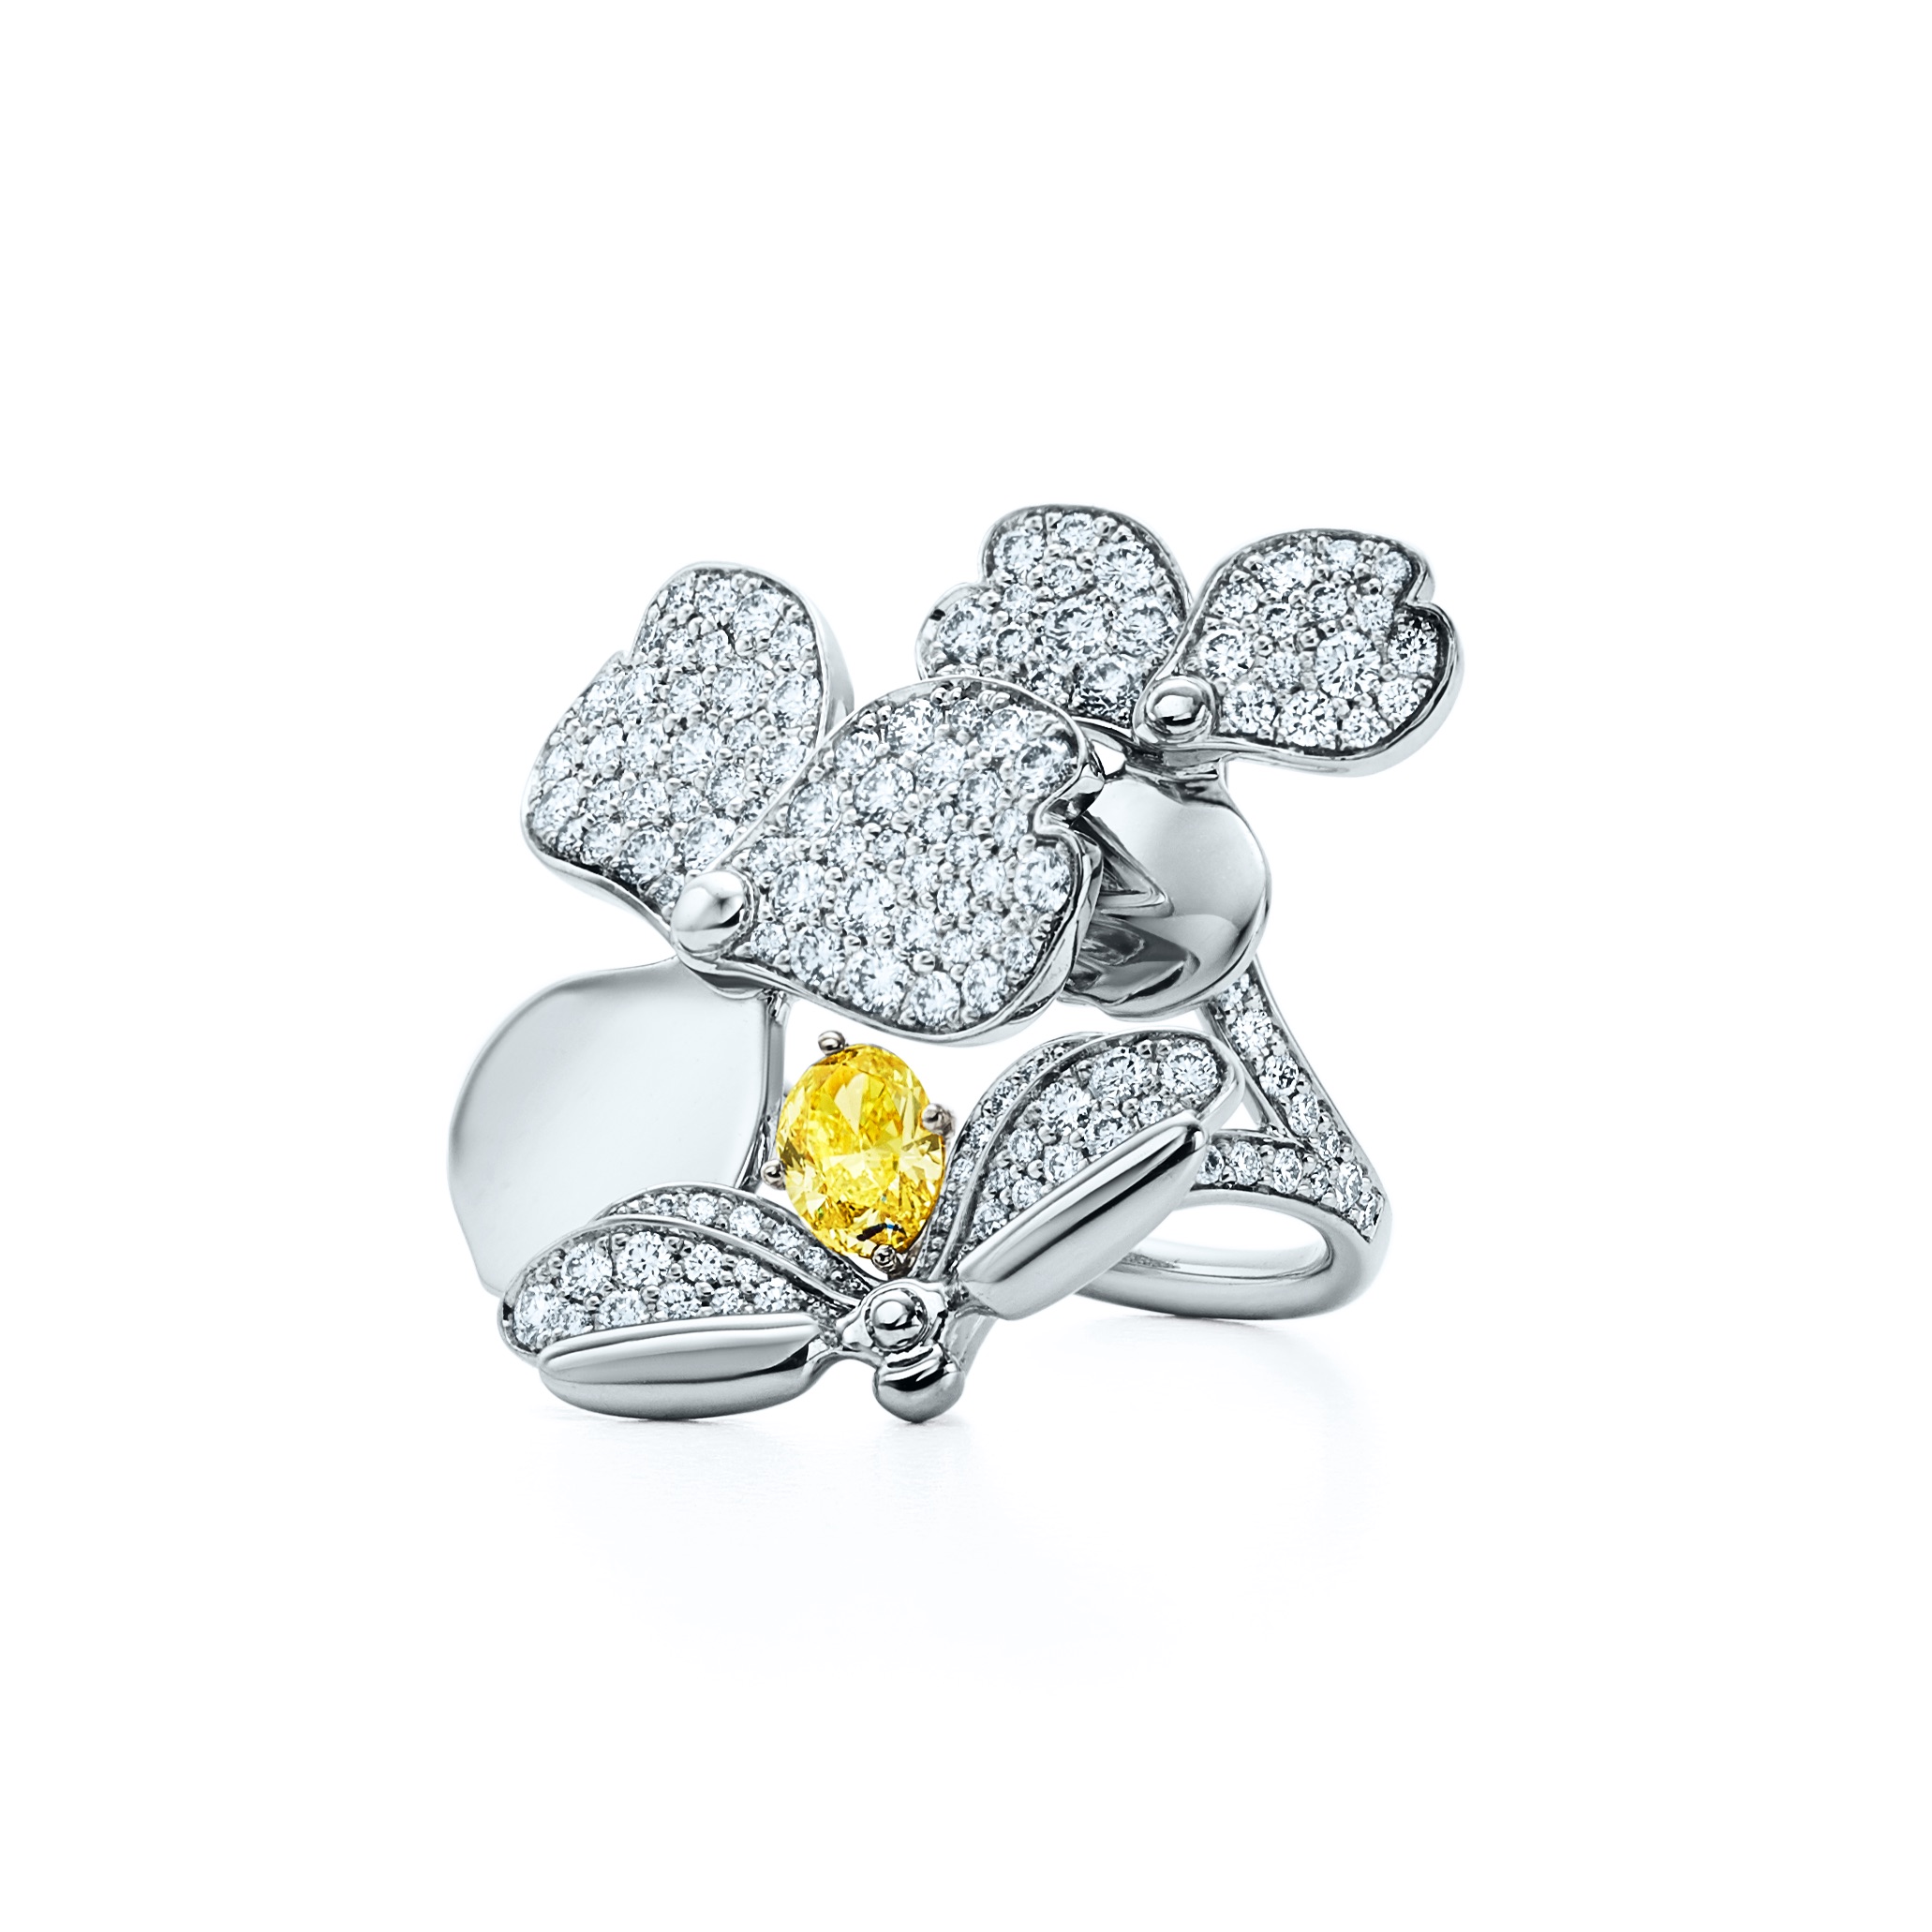 TPF Firefly ring in platinum with white diamonds and a yellow diamond